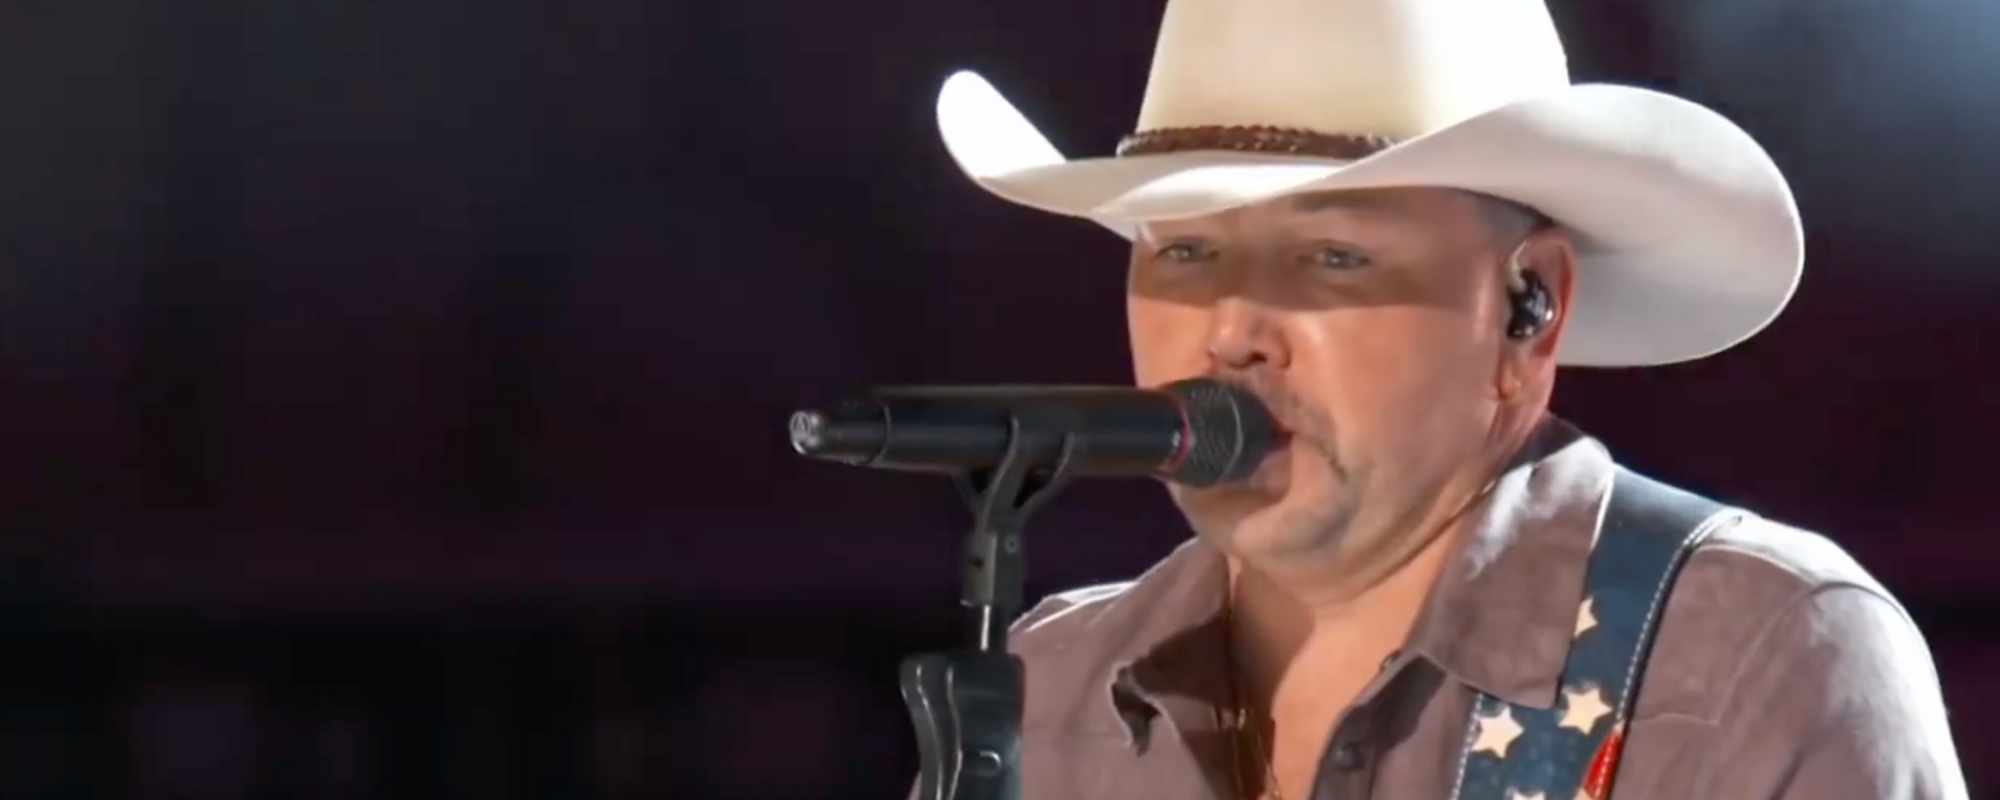 Jason Aldean Performs "Let Your Boys Be Country" at the CMT Music Awards Following Ban